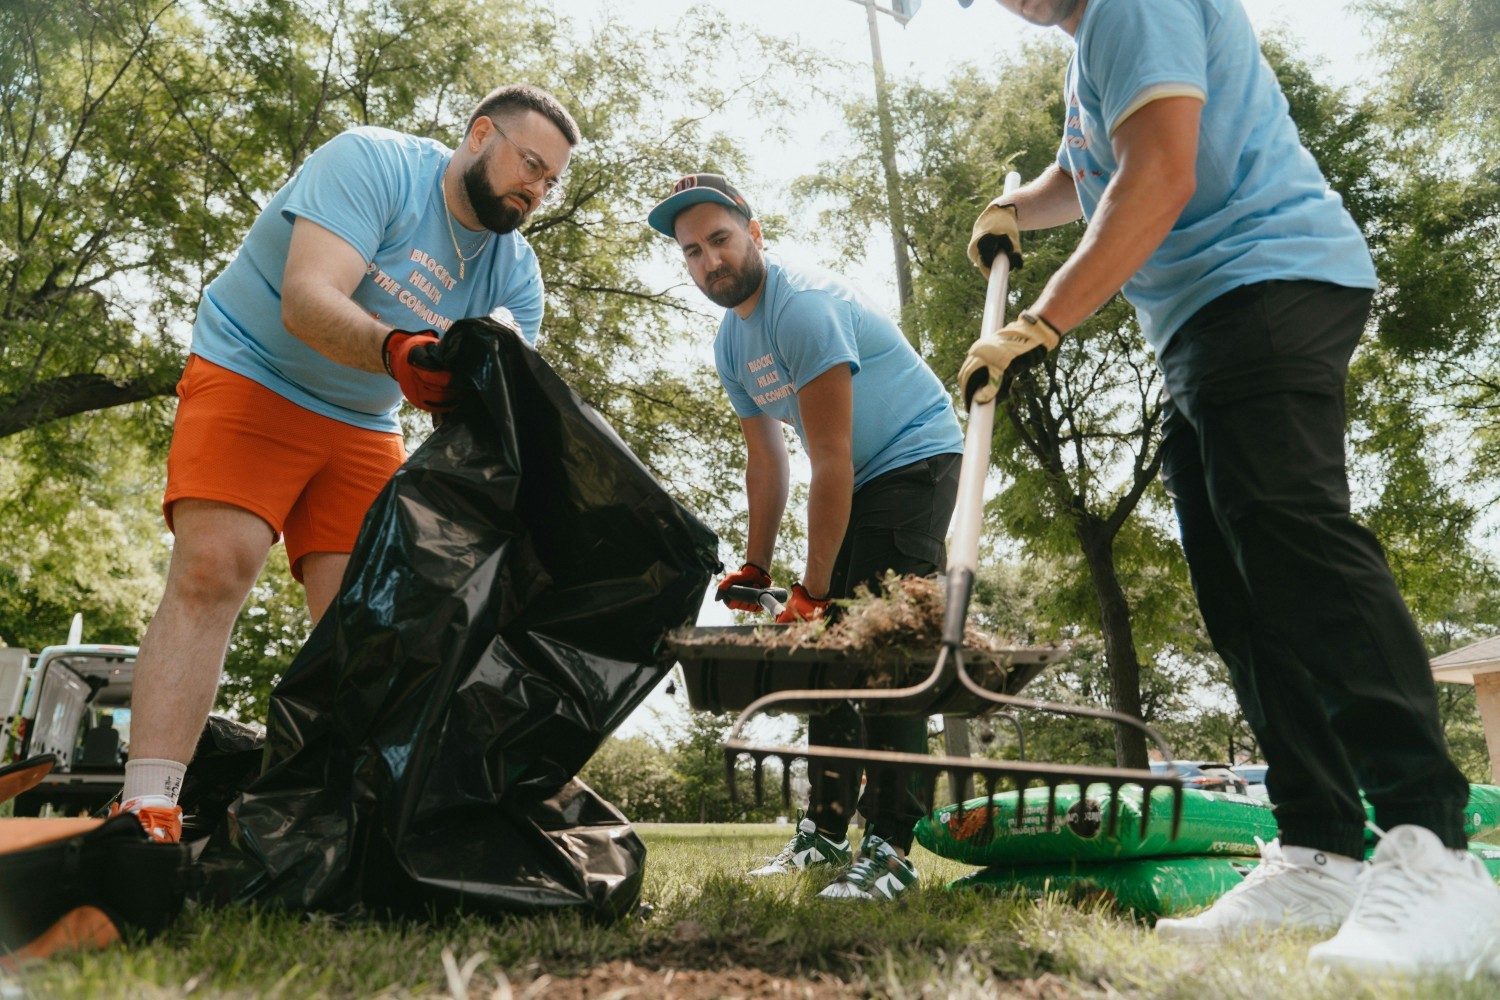 At Wilson we believe character is built by action, not words. That’s why we have Wilson Action Days where our team members are able to go out and positively donate their time to communities and causes that are important to them.